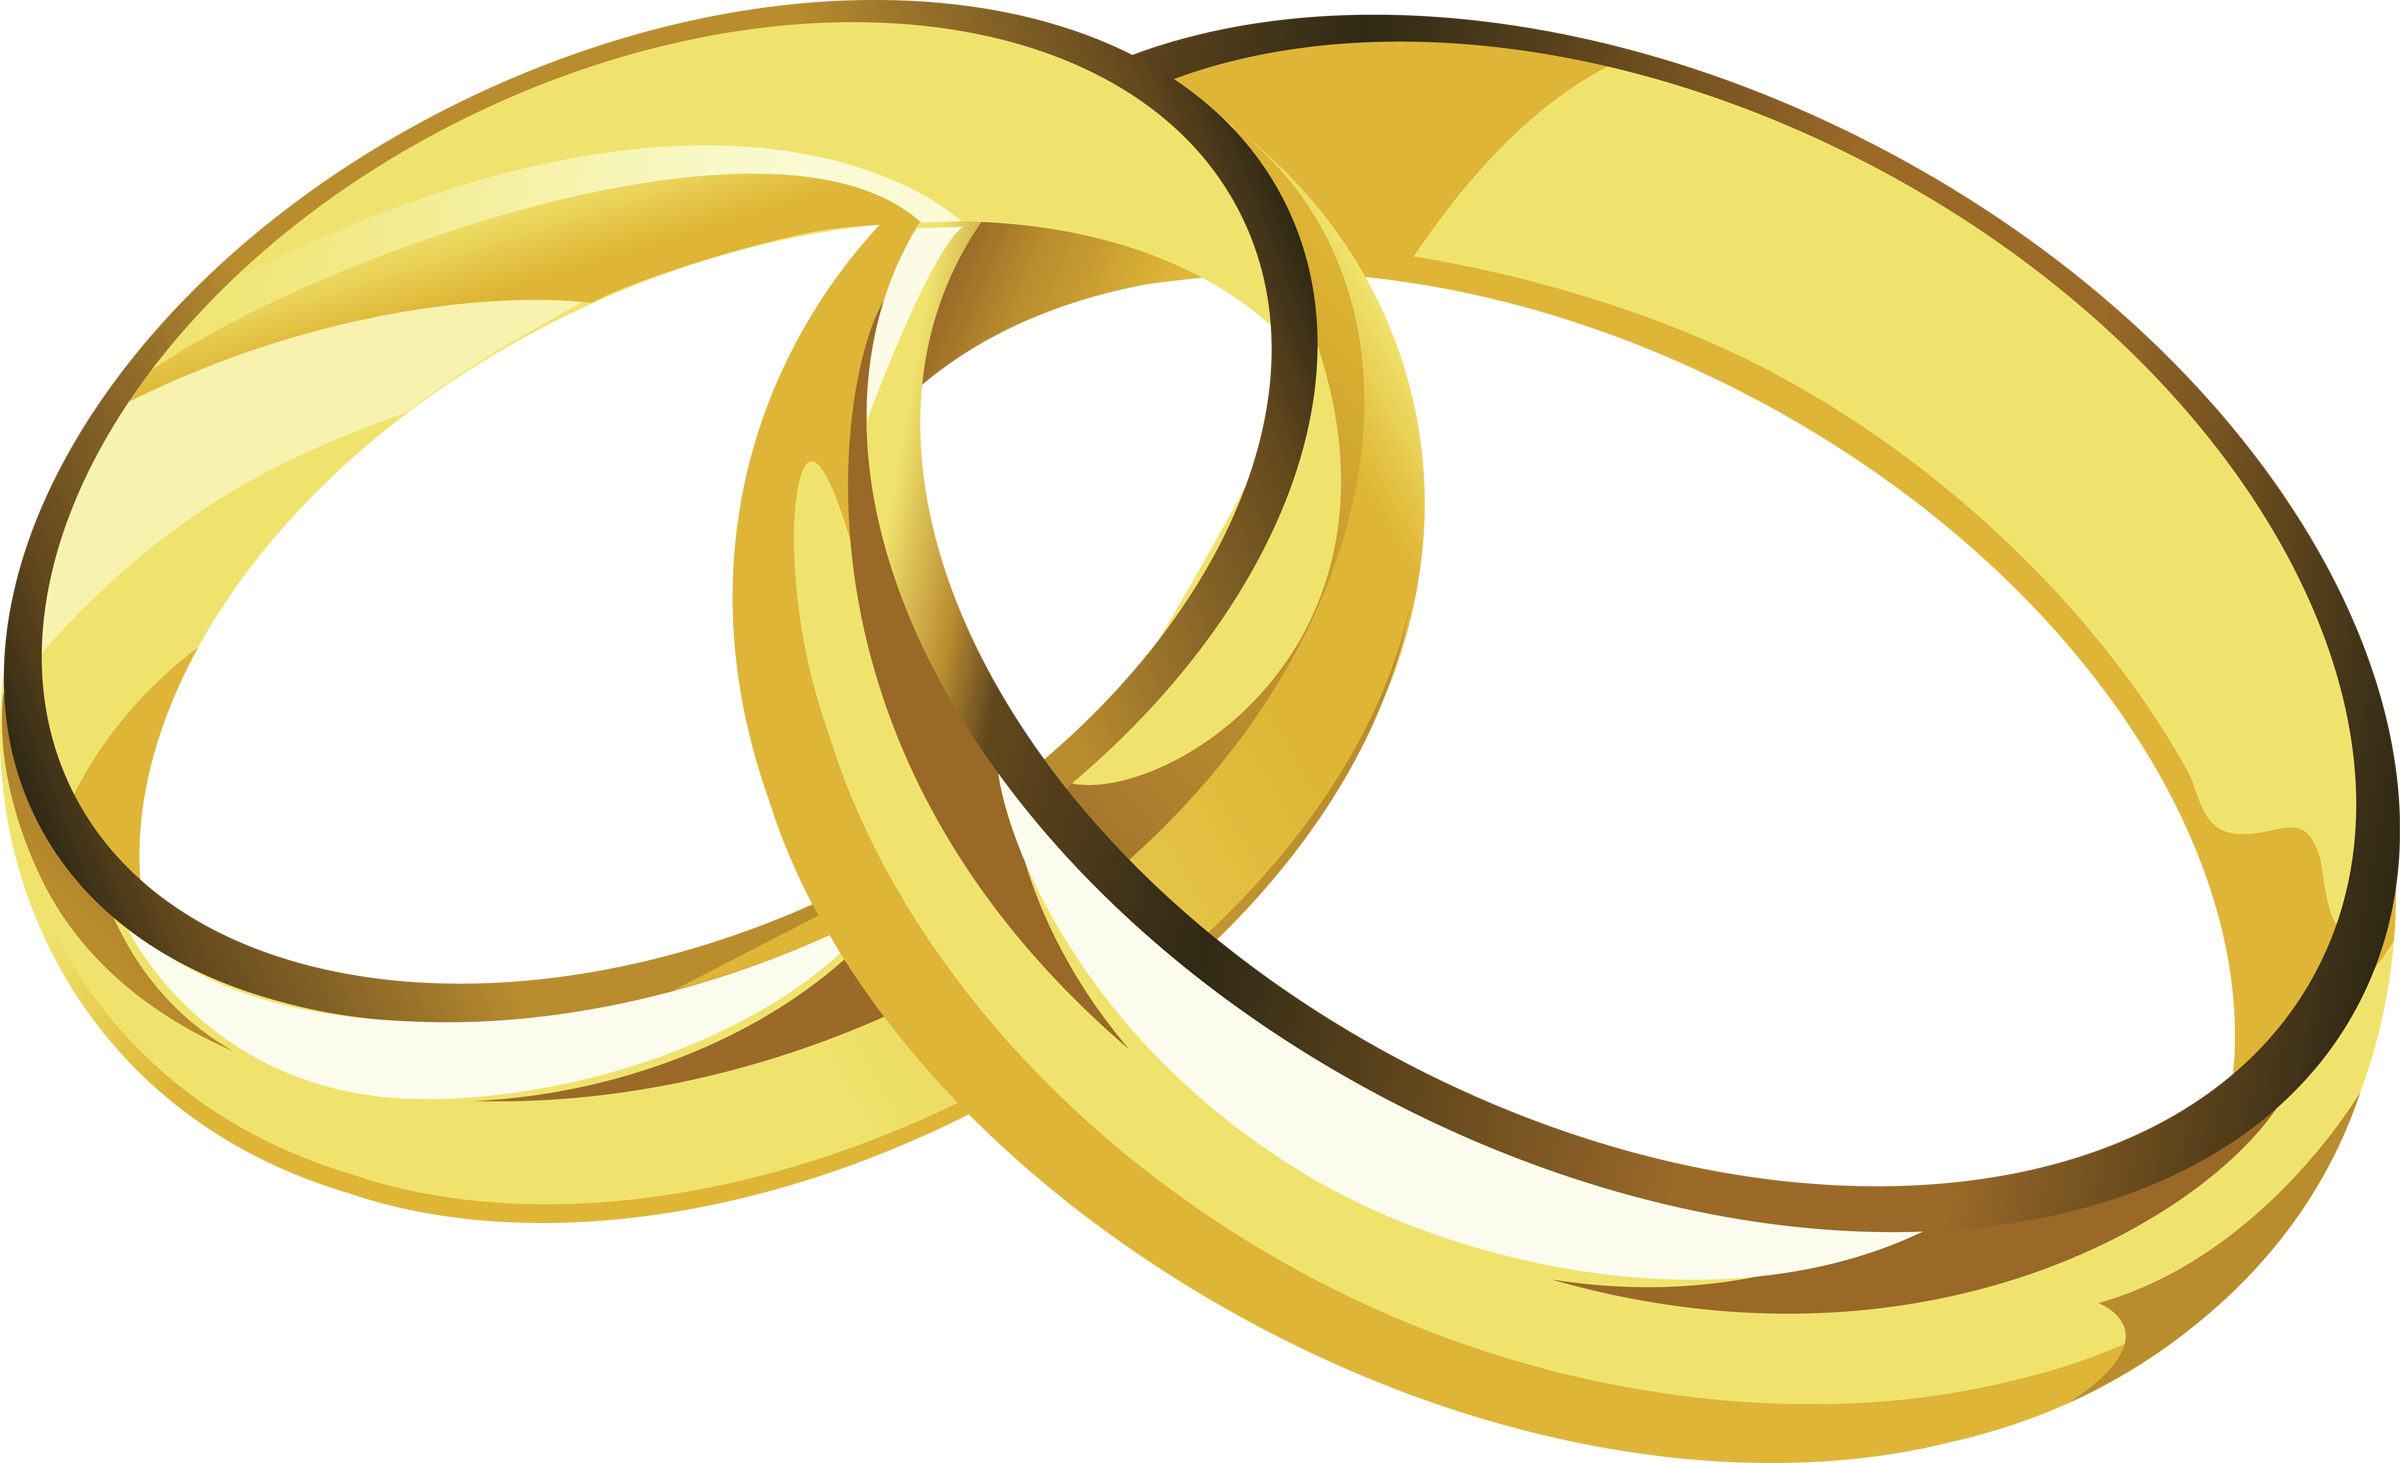 Linked wedding rings clipart free clipart images 4 clipartcow 2